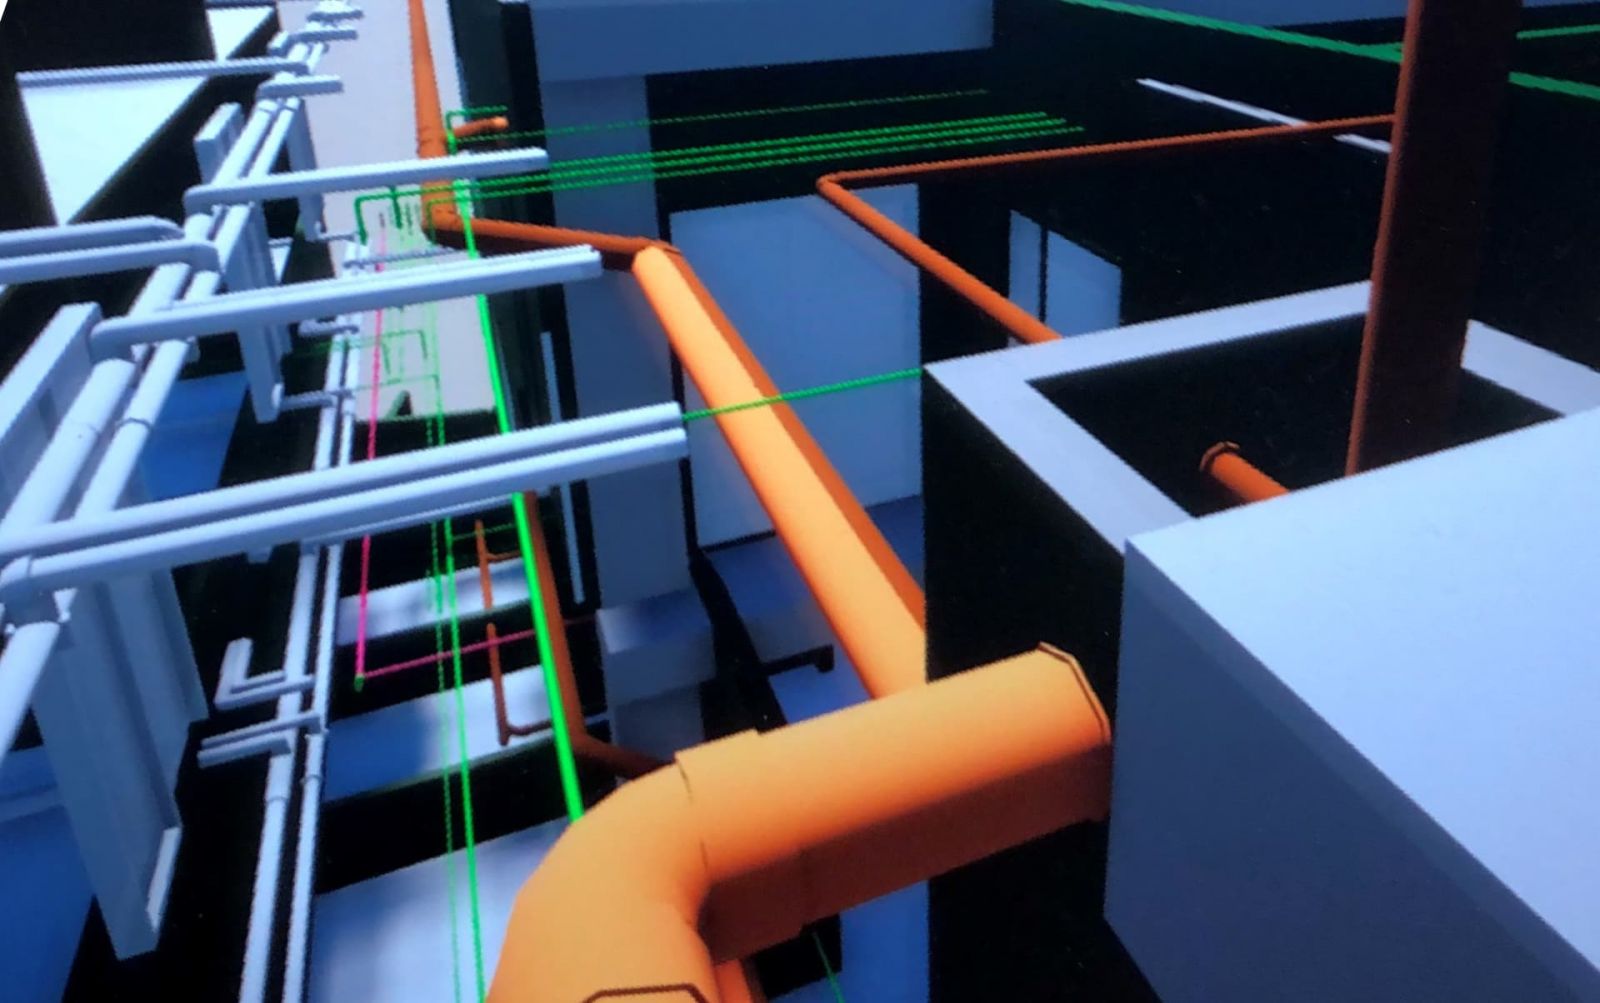 Virtual reality technology can help construction industry professionals see the routing of mechanical and electrical systems in 3D inside the walls of a structure.  (Image courtesy of Ramyani Sengupta)